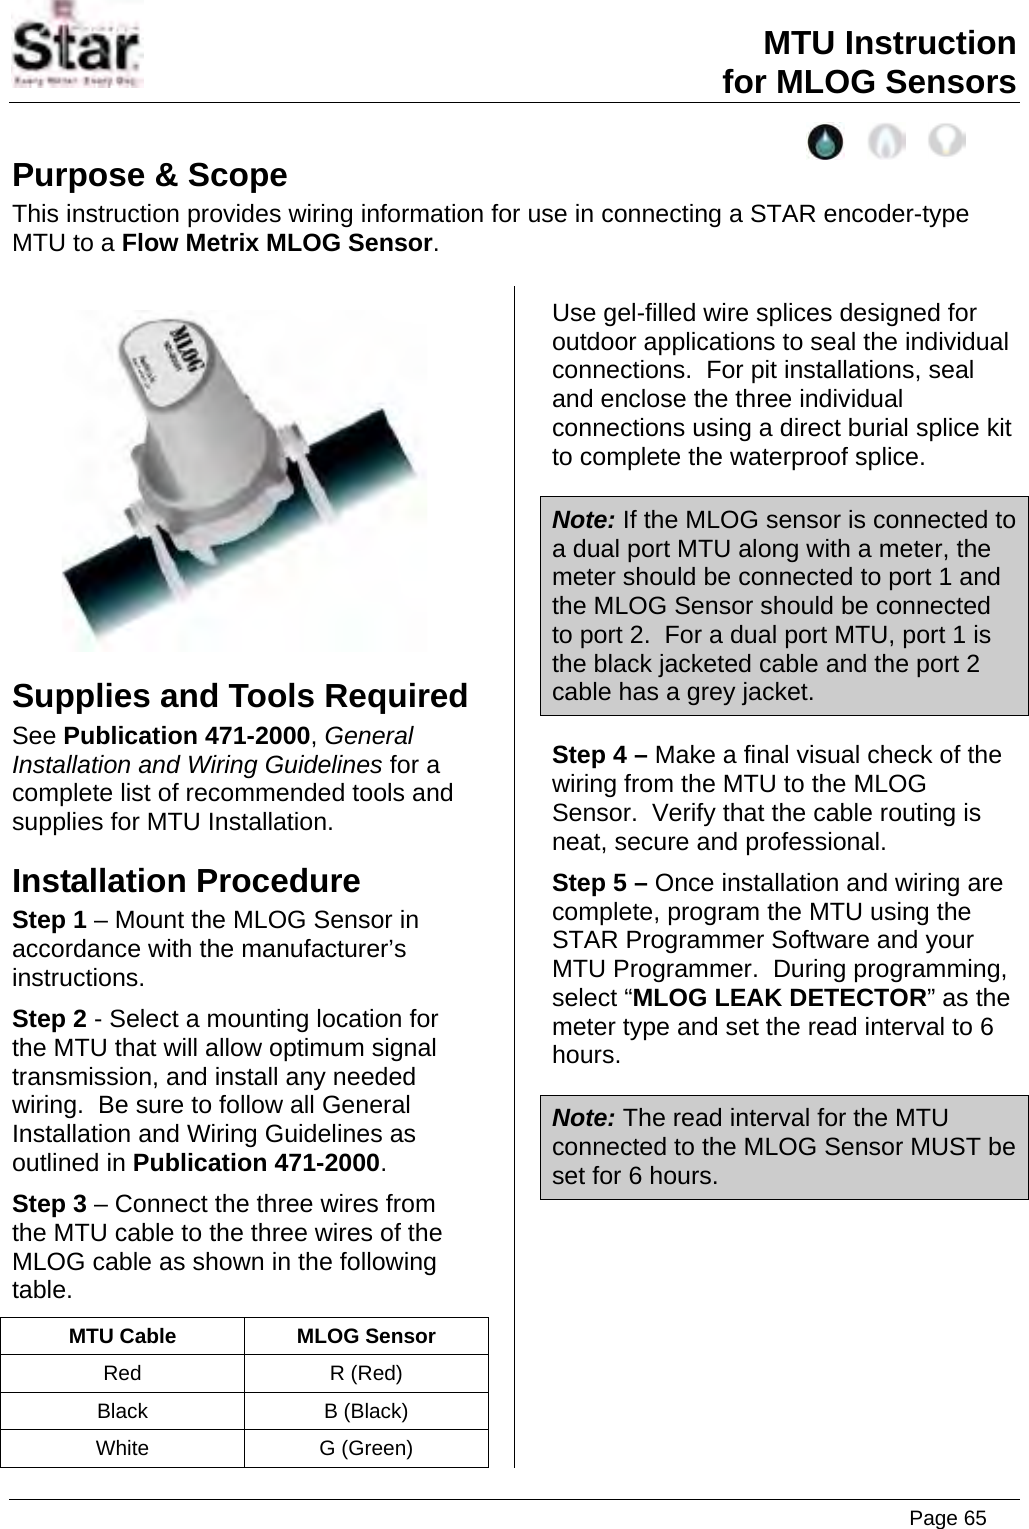 MTU Instruction for MLOG Sensors Purpose &amp; Scope This instruction provides wiring information for use in connecting a STAR encoder-type MTU to a Flow Metrix MLOG Sensor.   Supplies and Tools Required See Publication 471-2000, General Installation and Wiring Guidelines for a complete list of recommended tools and supplies for MTU Installation. Installation Procedure Step 1 – Mount the MLOG Sensor in accordance with the manufacturer’s instructions. Step 2 - Select a mounting location for the MTU that will allow optimum signal transmission, and install any needed wiring.  Be sure to follow all General Installation and Wiring Guidelines as outlined in Publication 471-2000. Step 3 – Connect the three wires from the MTU cable to the three wires of the MLOG cable as shown in the following table. MTU Cable  MLOG Sensor Red R (Red) Black B (Black) White G (Green) Use gel-filled wire splices designed for outdoor applications to seal the individual connections.  For pit installations, seal and enclose the three individual connections using a direct burial splice kit to complete the waterproof splice. Note: If the MLOG sensor is connected to a dual port MTU along with a meter, the meter should be connected to port 1 and the MLOG Sensor should be connected to port 2.  For a dual port MTU, port 1 is the black jacketed cable and the port 2 cable has a grey jacket. Step 4 – Make a final visual check of the wiring from the MTU to the MLOG Sensor.  Verify that the cable routing is neat, secure and professional. Step 5 – Once installation and wiring are complete, program the MTU using the STAR Programmer Software and your MTU Programmer.  During programming, select “MLOG LEAK DETECTOR” as the meter type and set the read interval to 6 hours. Note: The read interval for the MTU connected to the MLOG Sensor MUST be set for 6 hours.  Page 65